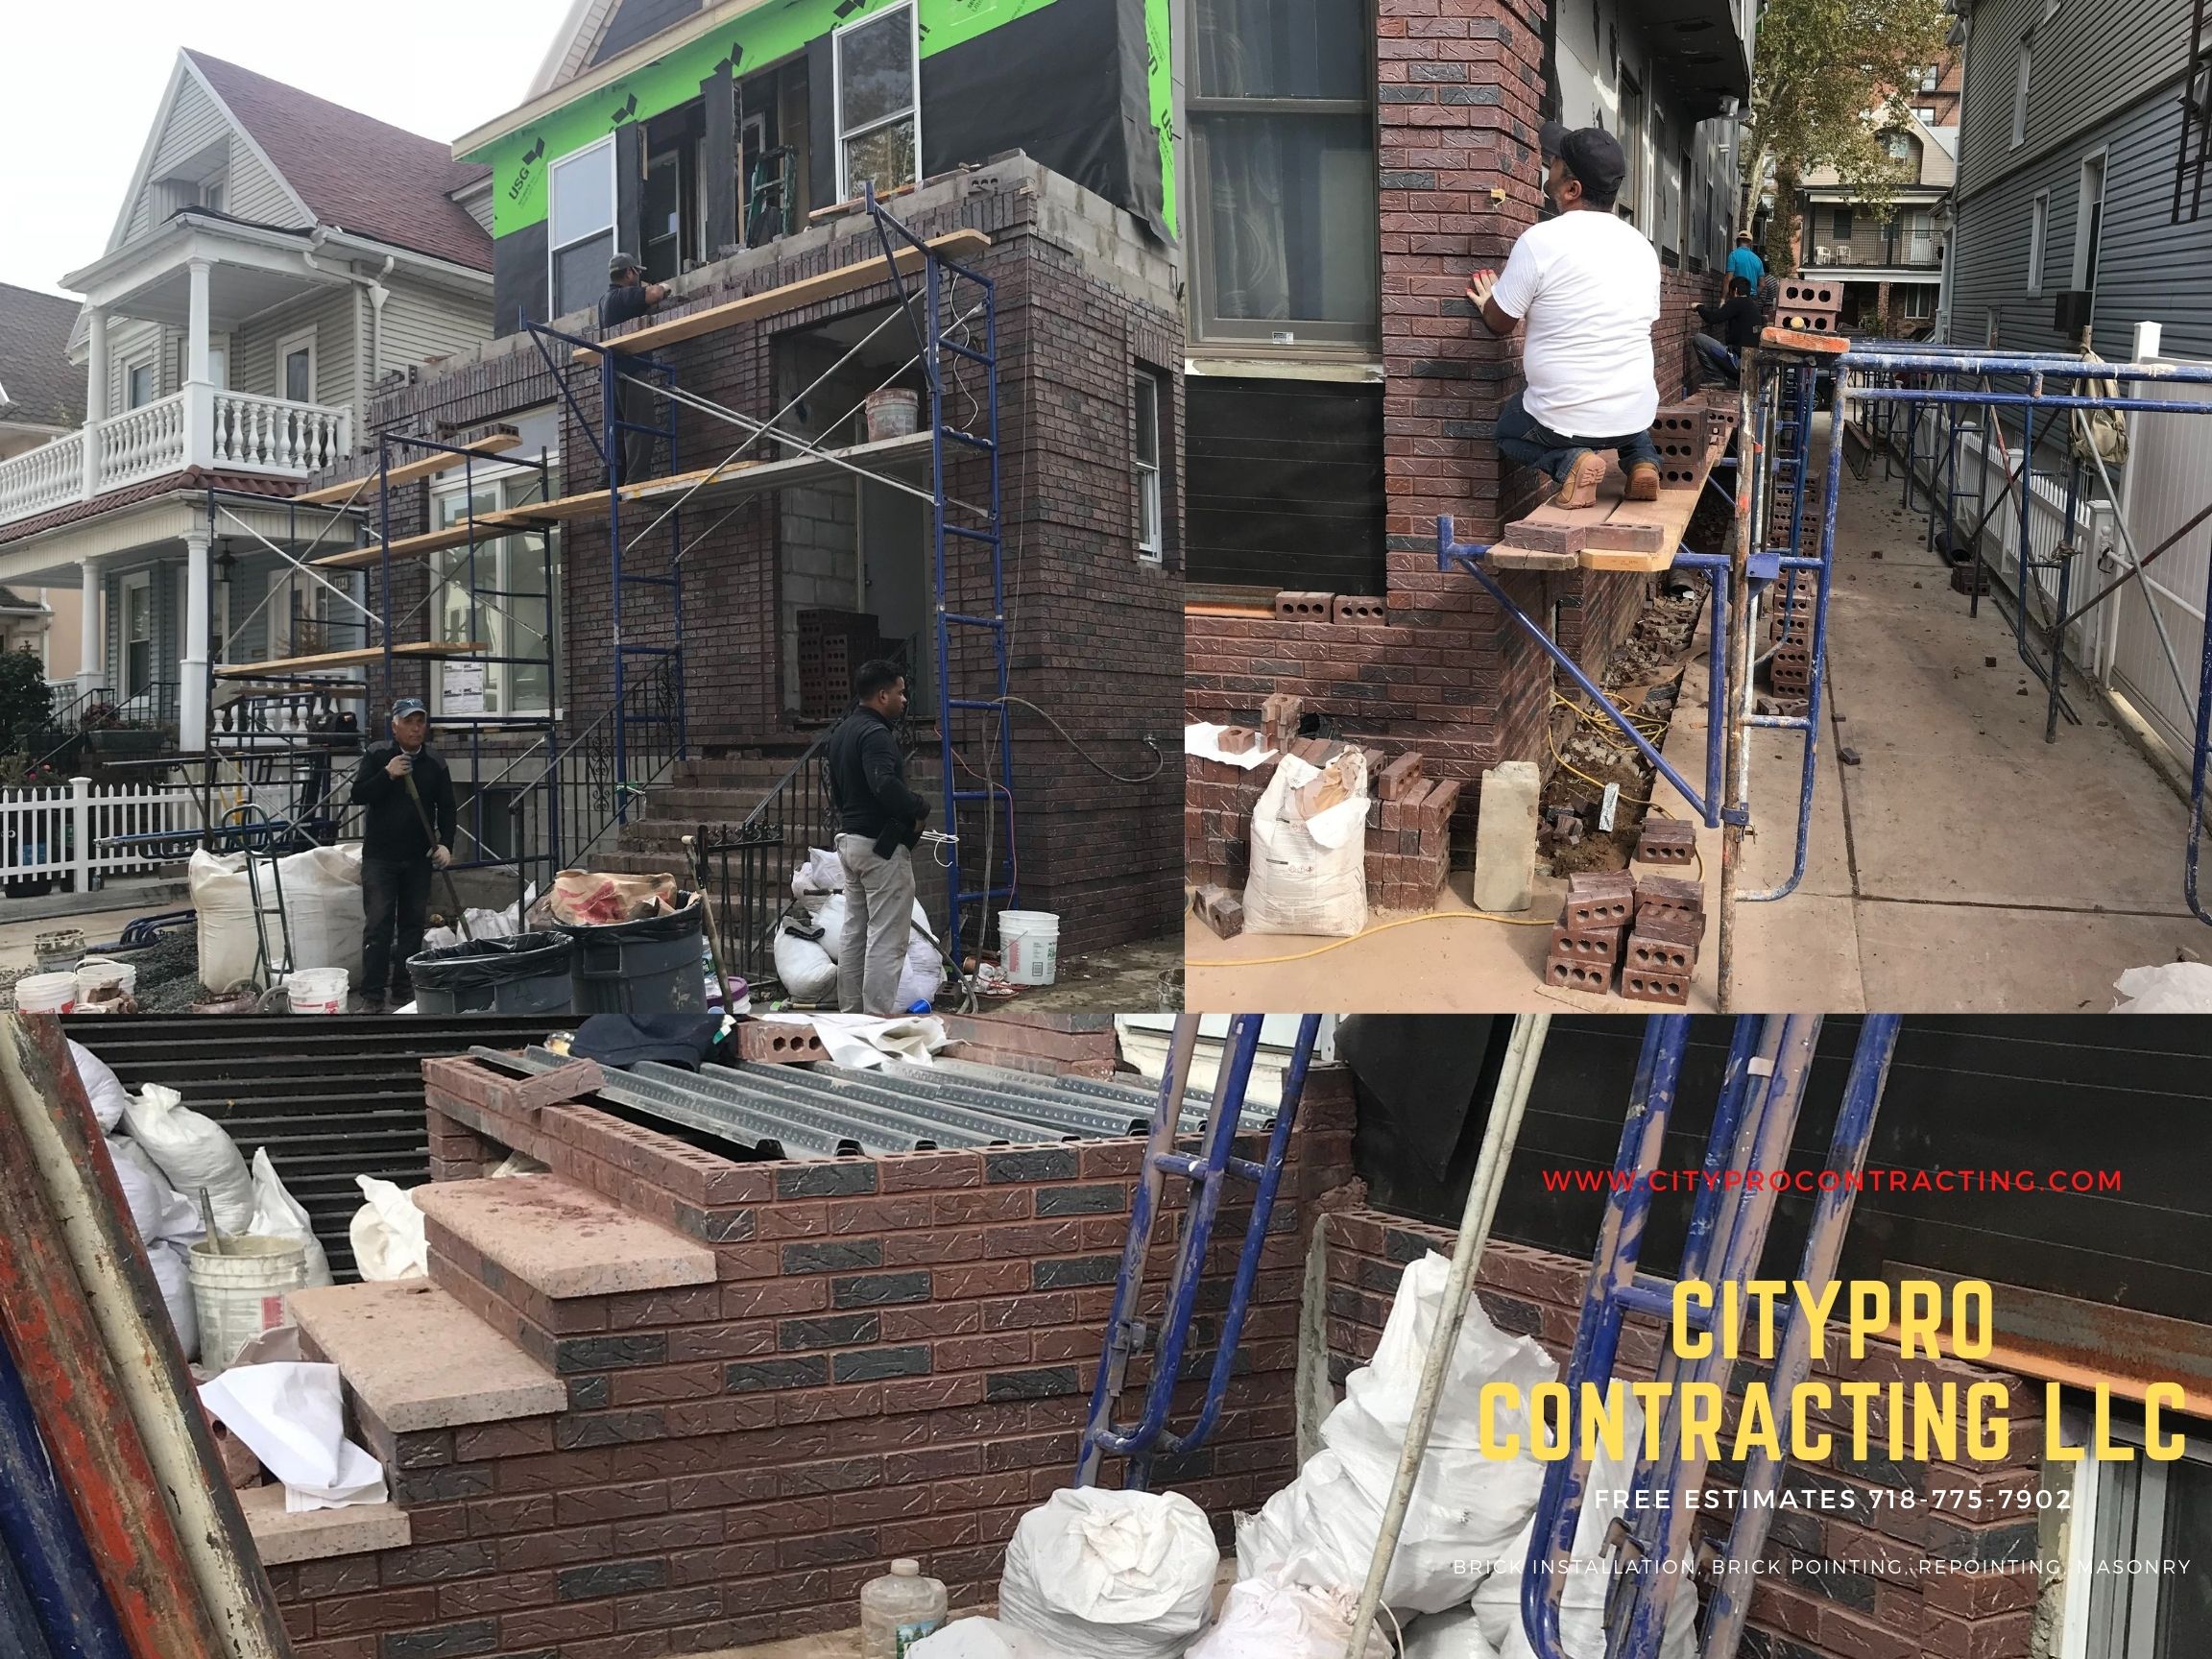 Brownstone Contractor Brooklyn, Remodeling, Brick Repointing, Facade Restoration, Waterproofing, Limestone Installation, Masonry and Painting Construction work.